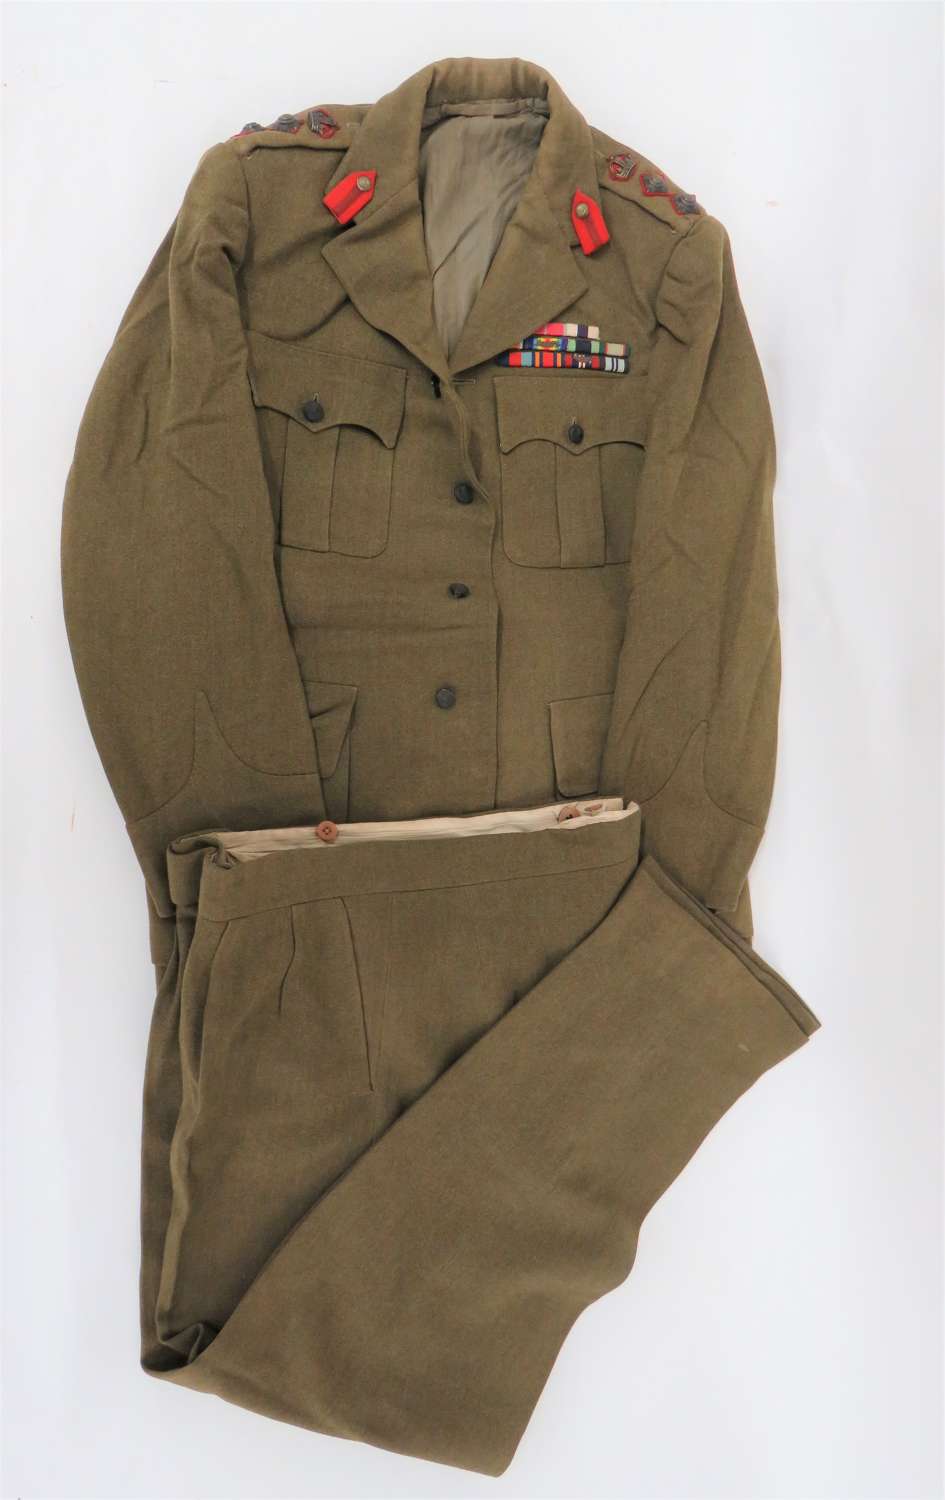 Superb Staff Officers Service Tunic and Trousers